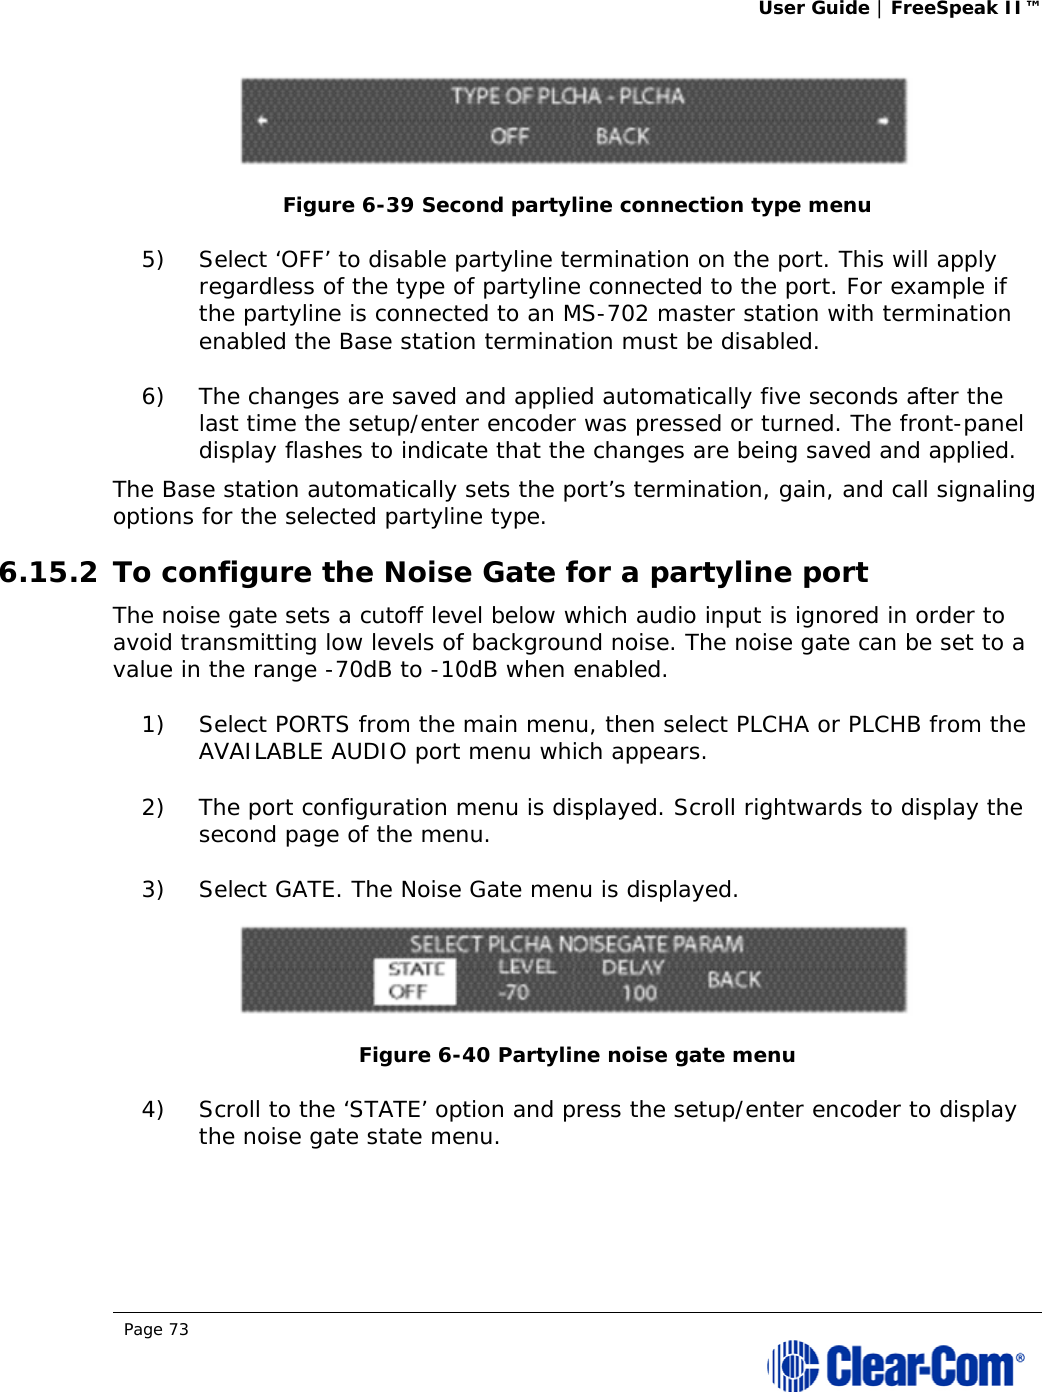 User Guide | FreeSpeak II™  Page 73   Figure 6-39 Second partyline connection type menu 5) Select ‘OFF’ to disable partyline termination on the port. This will apply regardless of the type of partyline connected to the port. For example if the partyline is connected to an MS-702 master station with termination enabled the Base station termination must be disabled. 6) The changes are saved and applied automatically five seconds after the last time the setup/enter encoder was pressed or turned. The front-panel display flashes to indicate that the changes are being saved and applied.  The Base station automatically sets the port’s termination, gain, and call signaling options for the selected partyline type.  6.15.2 To configure the Noise Gate for a partyline port The noise gate sets a cutoff level below which audio input is ignored in order to avoid transmitting low levels of background noise. The noise gate can be set to a value in the range -70dB to -10dB when enabled. 1) Select PORTS from the main menu, then select PLCHA or PLCHB from the AVAILABLE AUDIO port menu which appears. 2) The port configuration menu is displayed. Scroll rightwards to display the second page of the menu. 3) Select GATE. The Noise Gate menu is displayed.  Figure 6-40 Partyline noise gate menu 4) Scroll to the ‘STATE’ option and press the setup/enter encoder to display the noise gate state menu.  